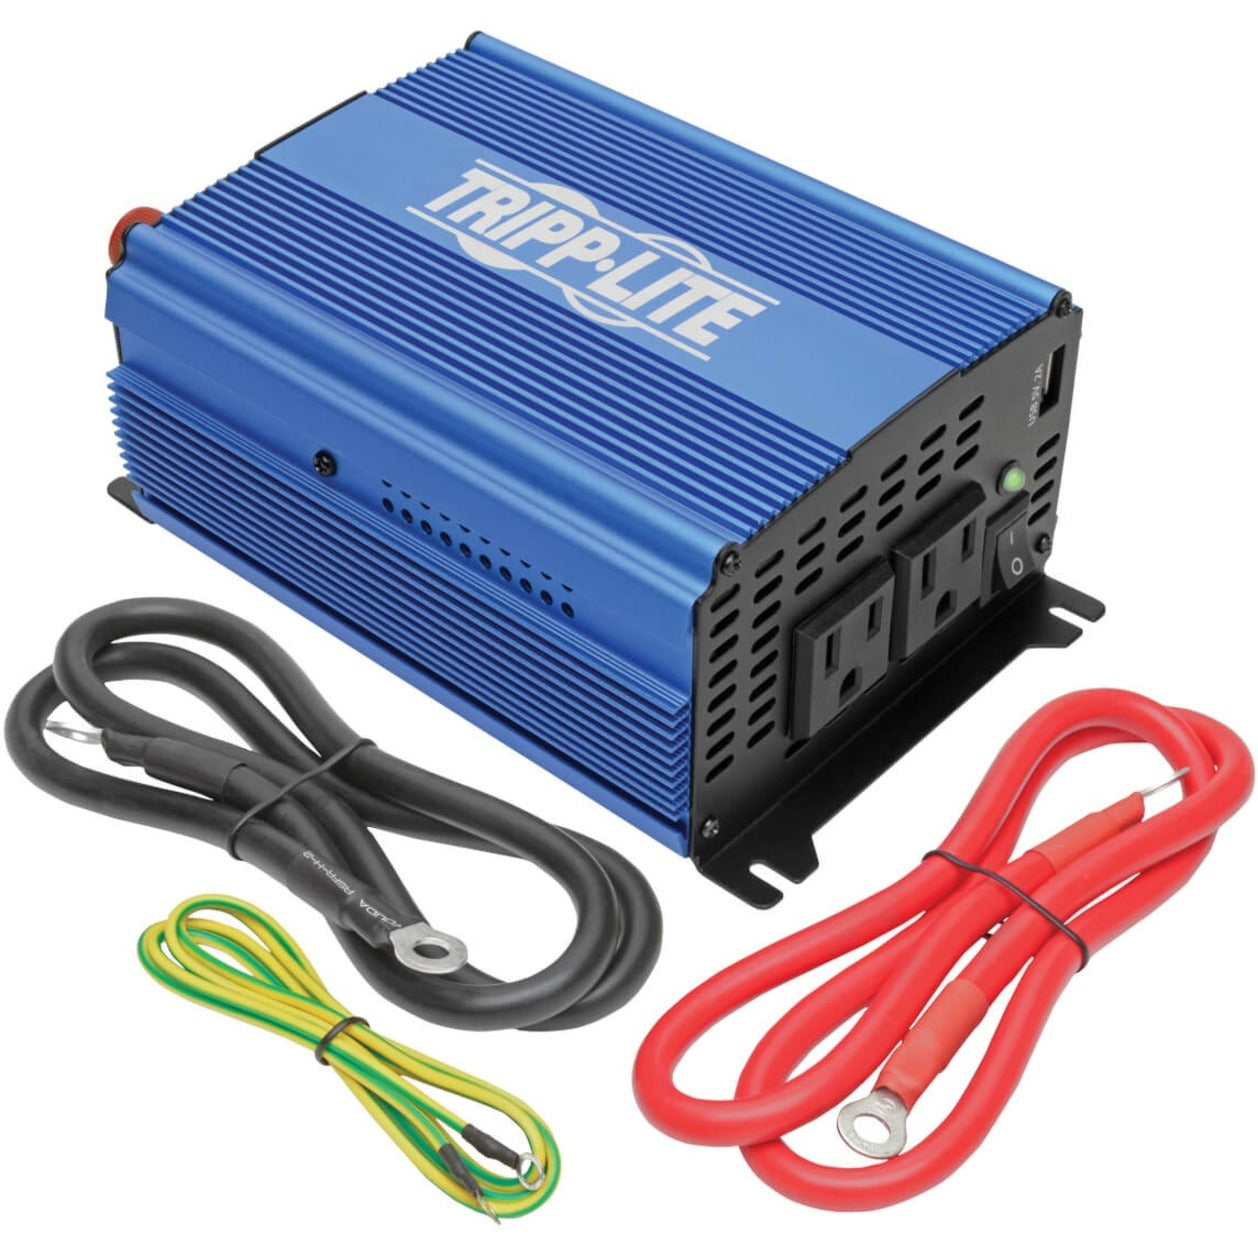 Tripp Lite PINV1000 Power Inverter 1000W Light-Duty Compact with 2 AC/1 USB - 2.0A/Battery Cables